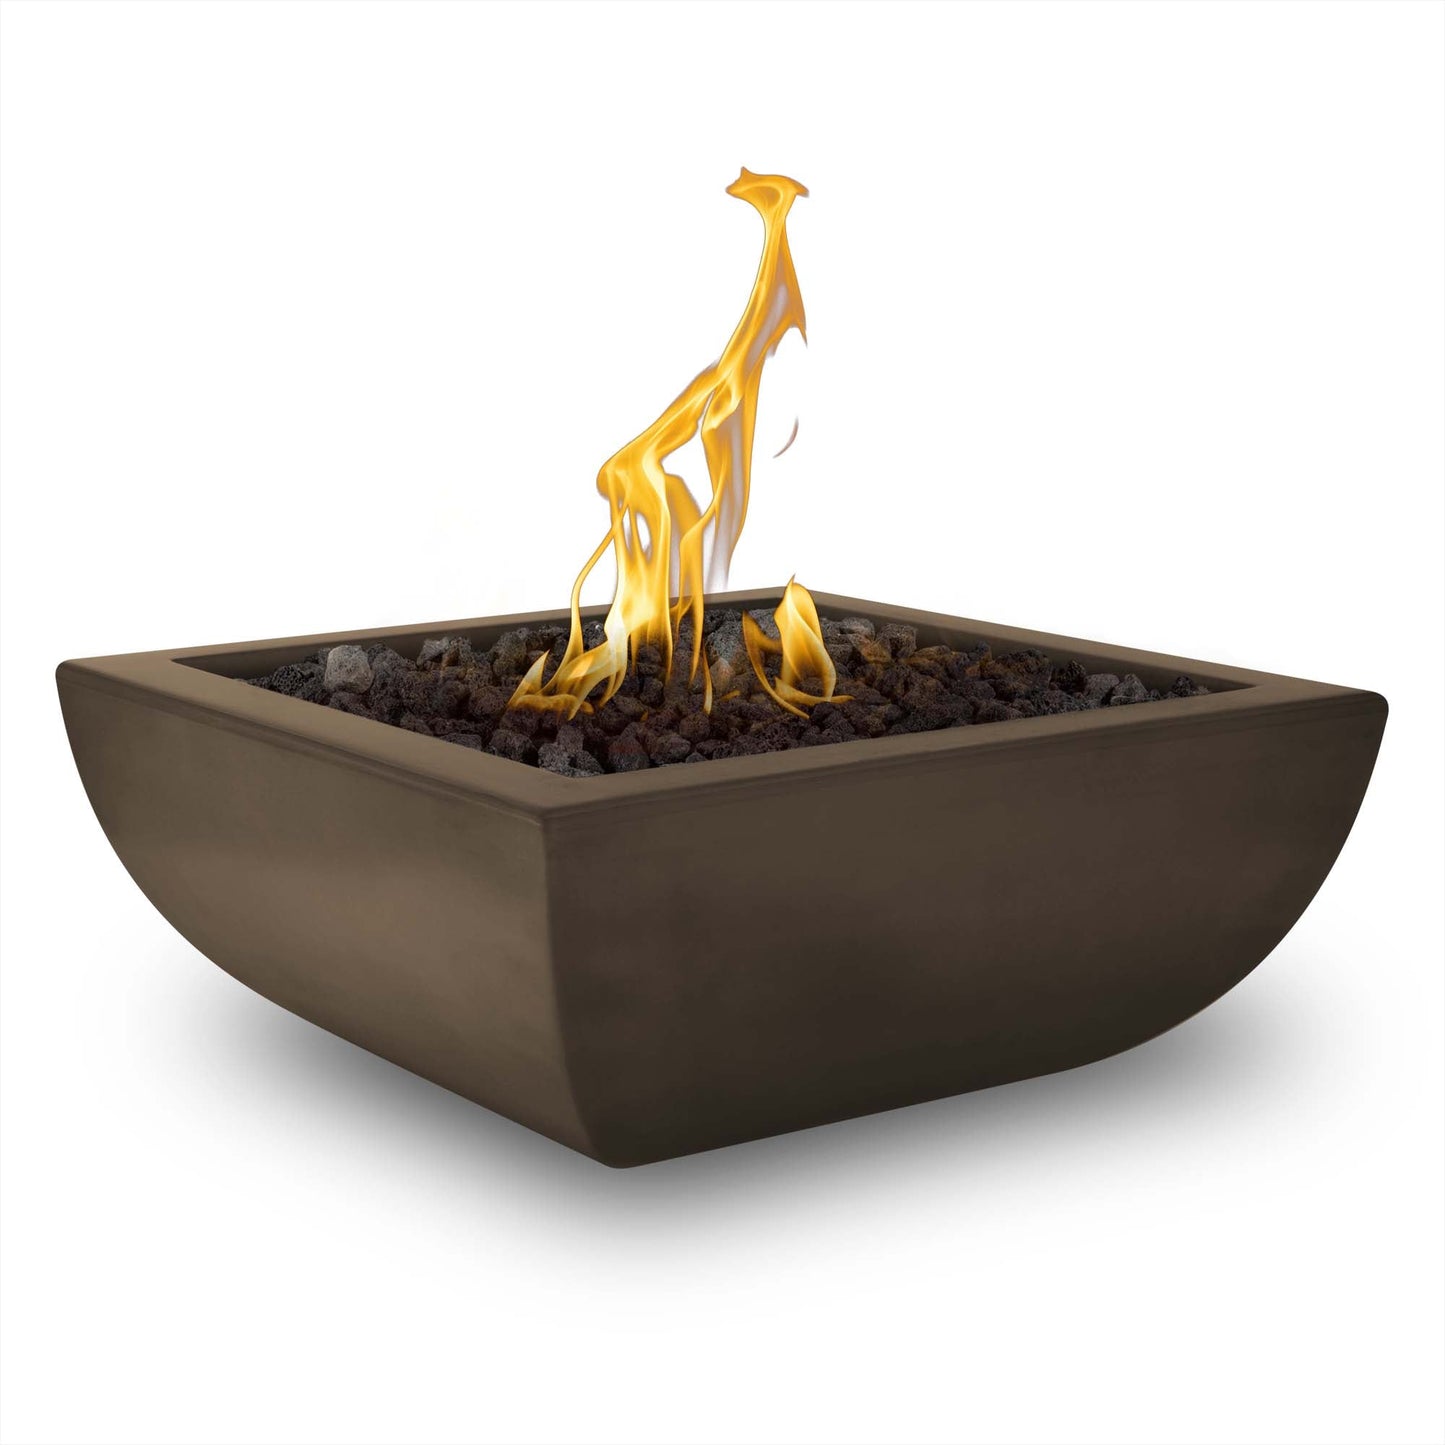 The Outdoor Plus Square Avalon 30" Metallic Pearl GFRC Concrete Natural Gas Fire Bowl with Match Lit with Flame Sense Ignition